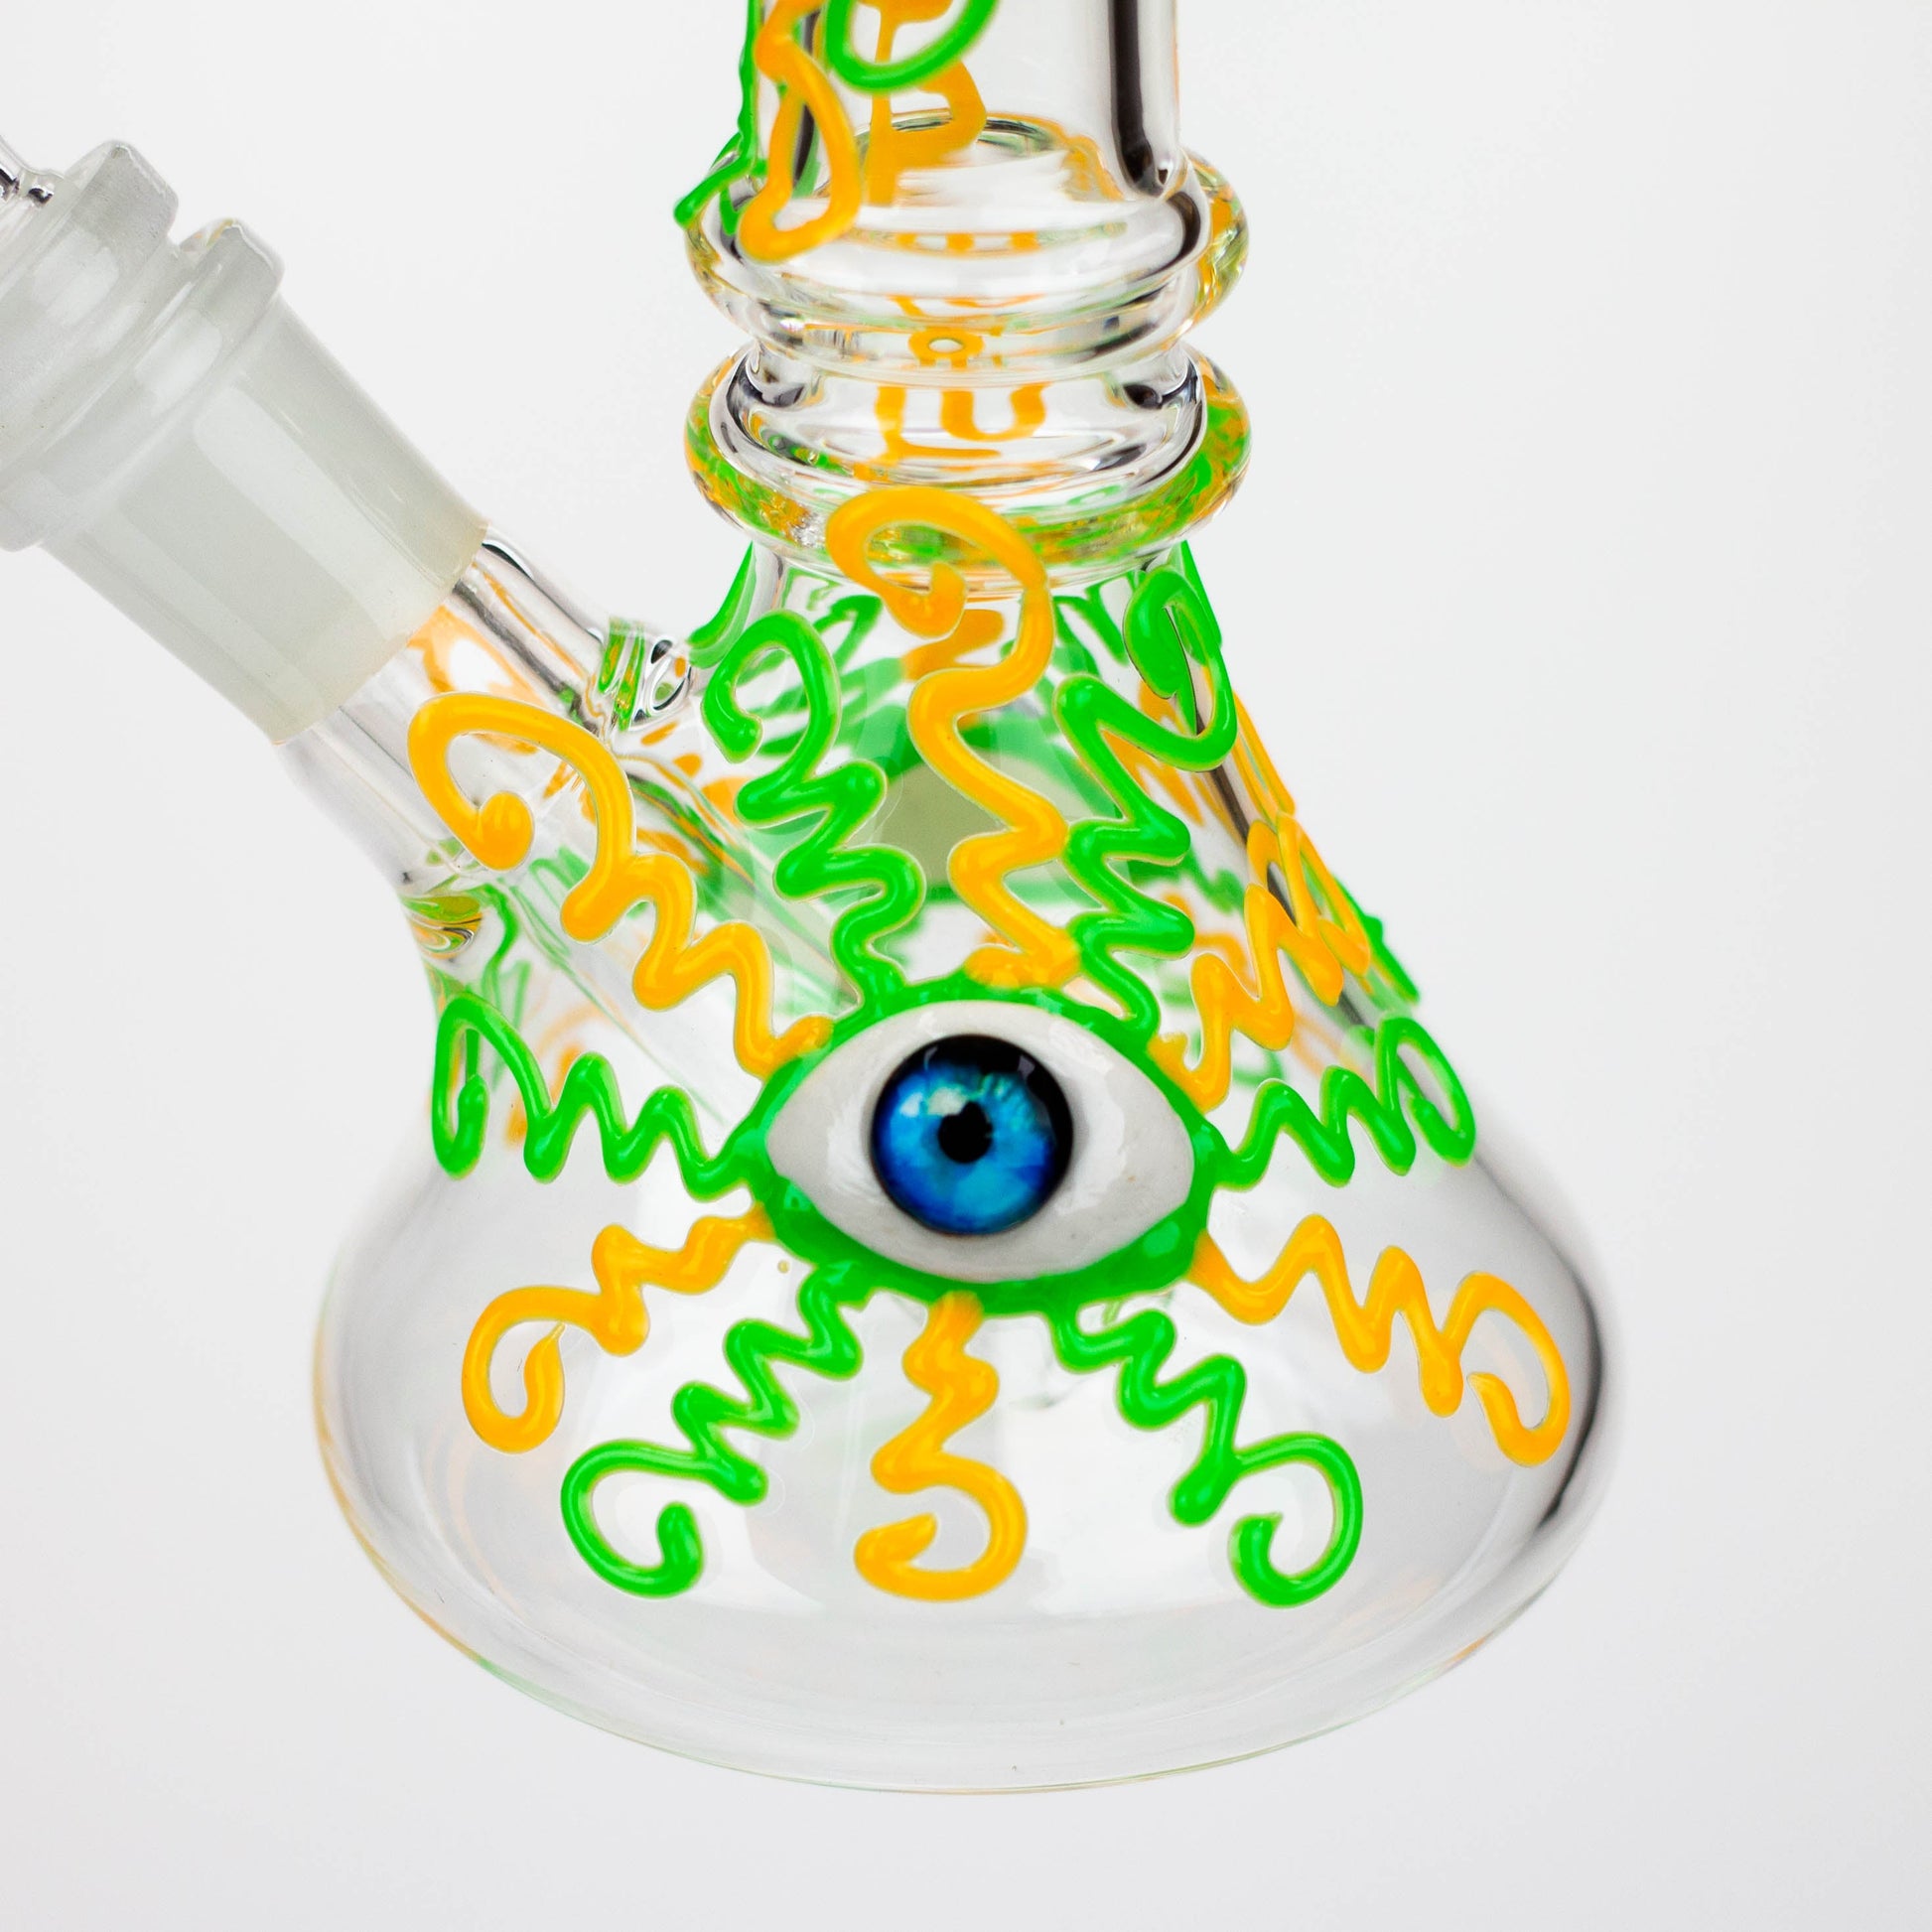 8" Glow in the dark Glass Bong With Eye Design [BH090]_5